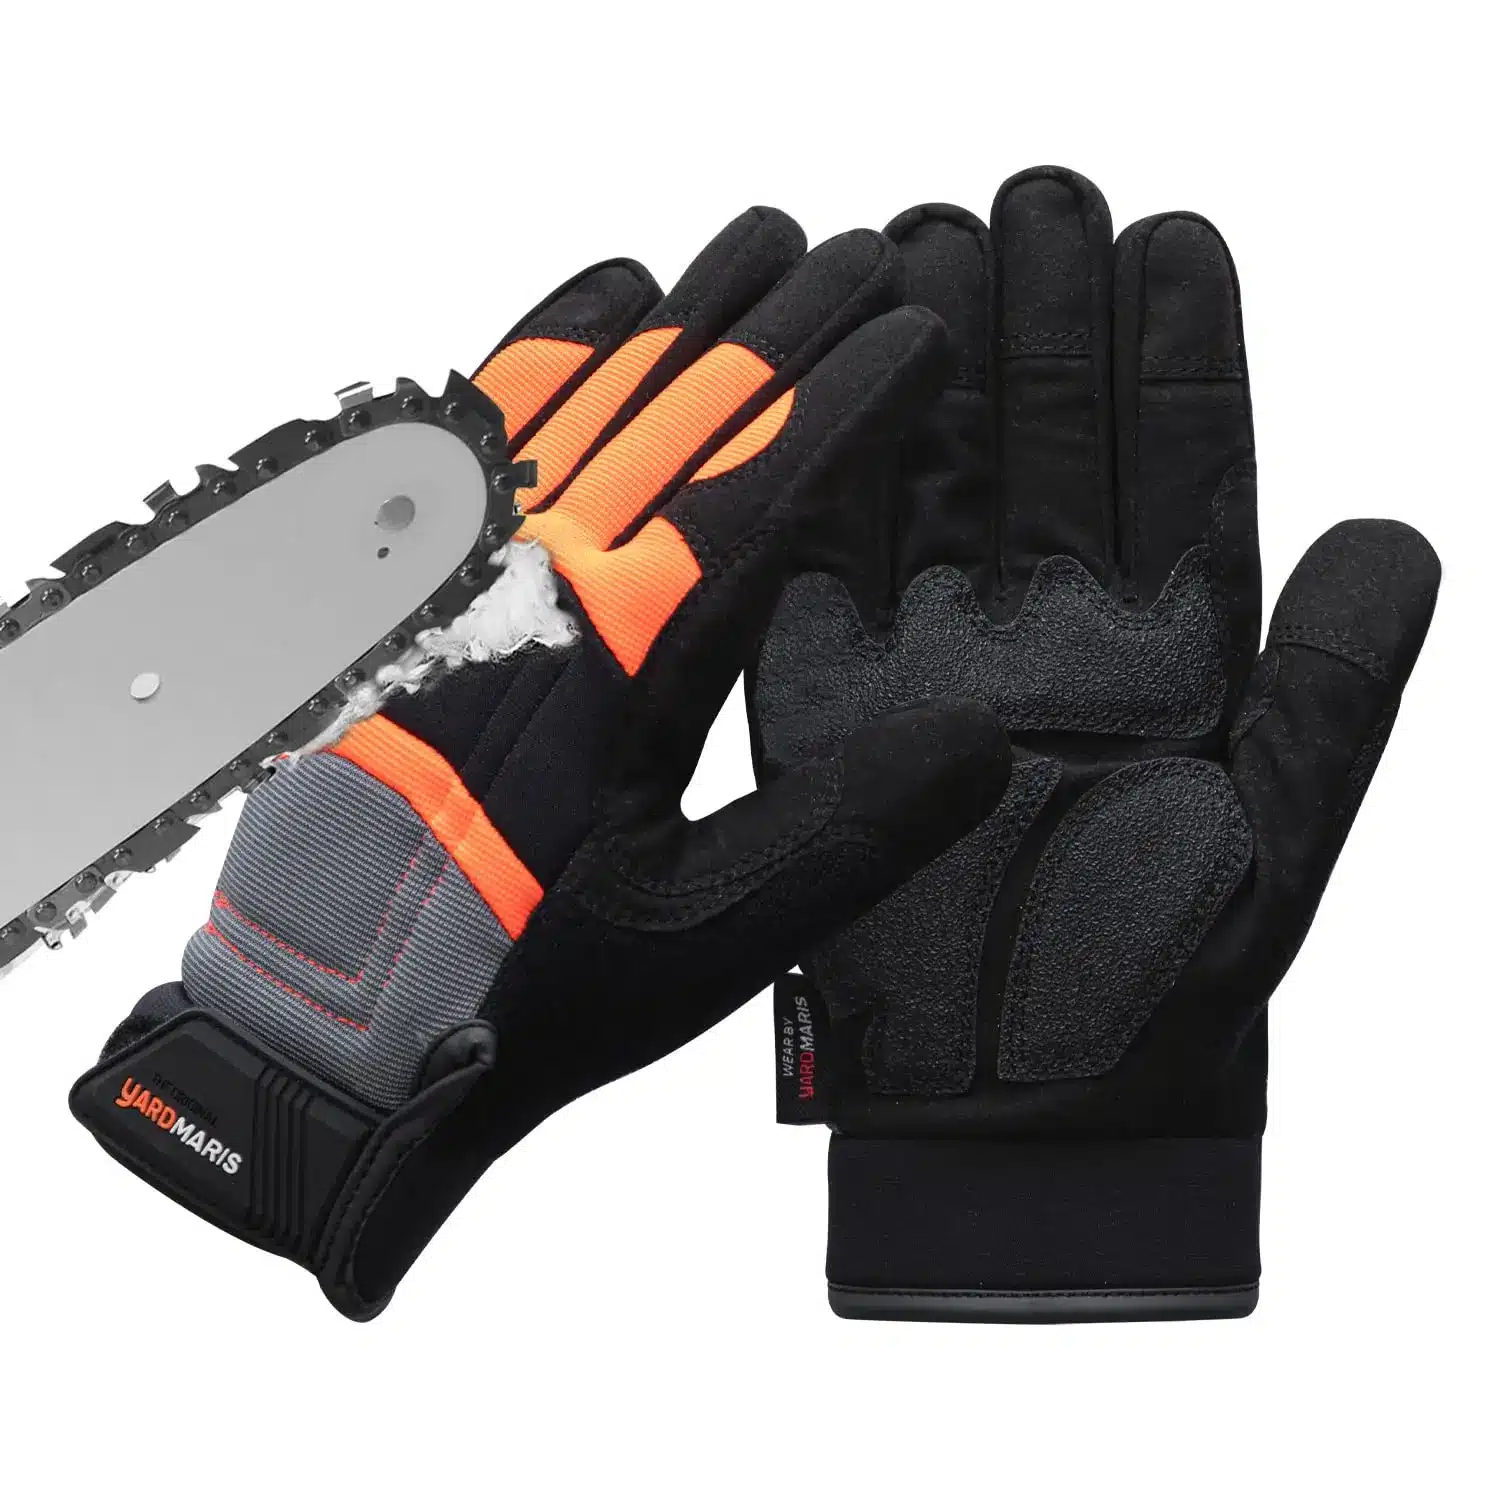 7 best chainsaw gloves: essential safety gear for woodcutting